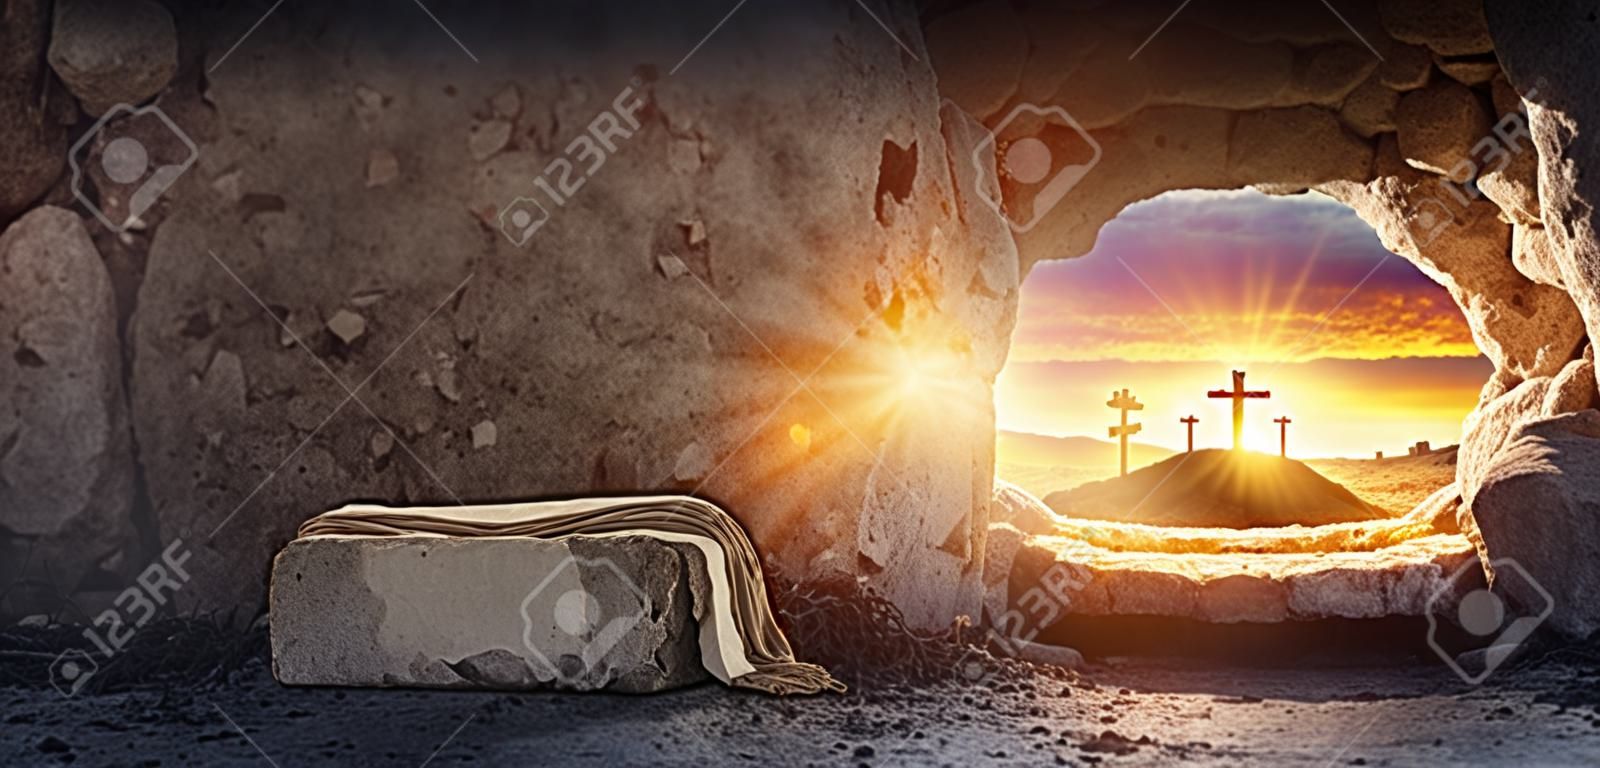 Tomb Empty With Shroud And Crucifixion At Sunrise Resurrection Of Jesus Christ